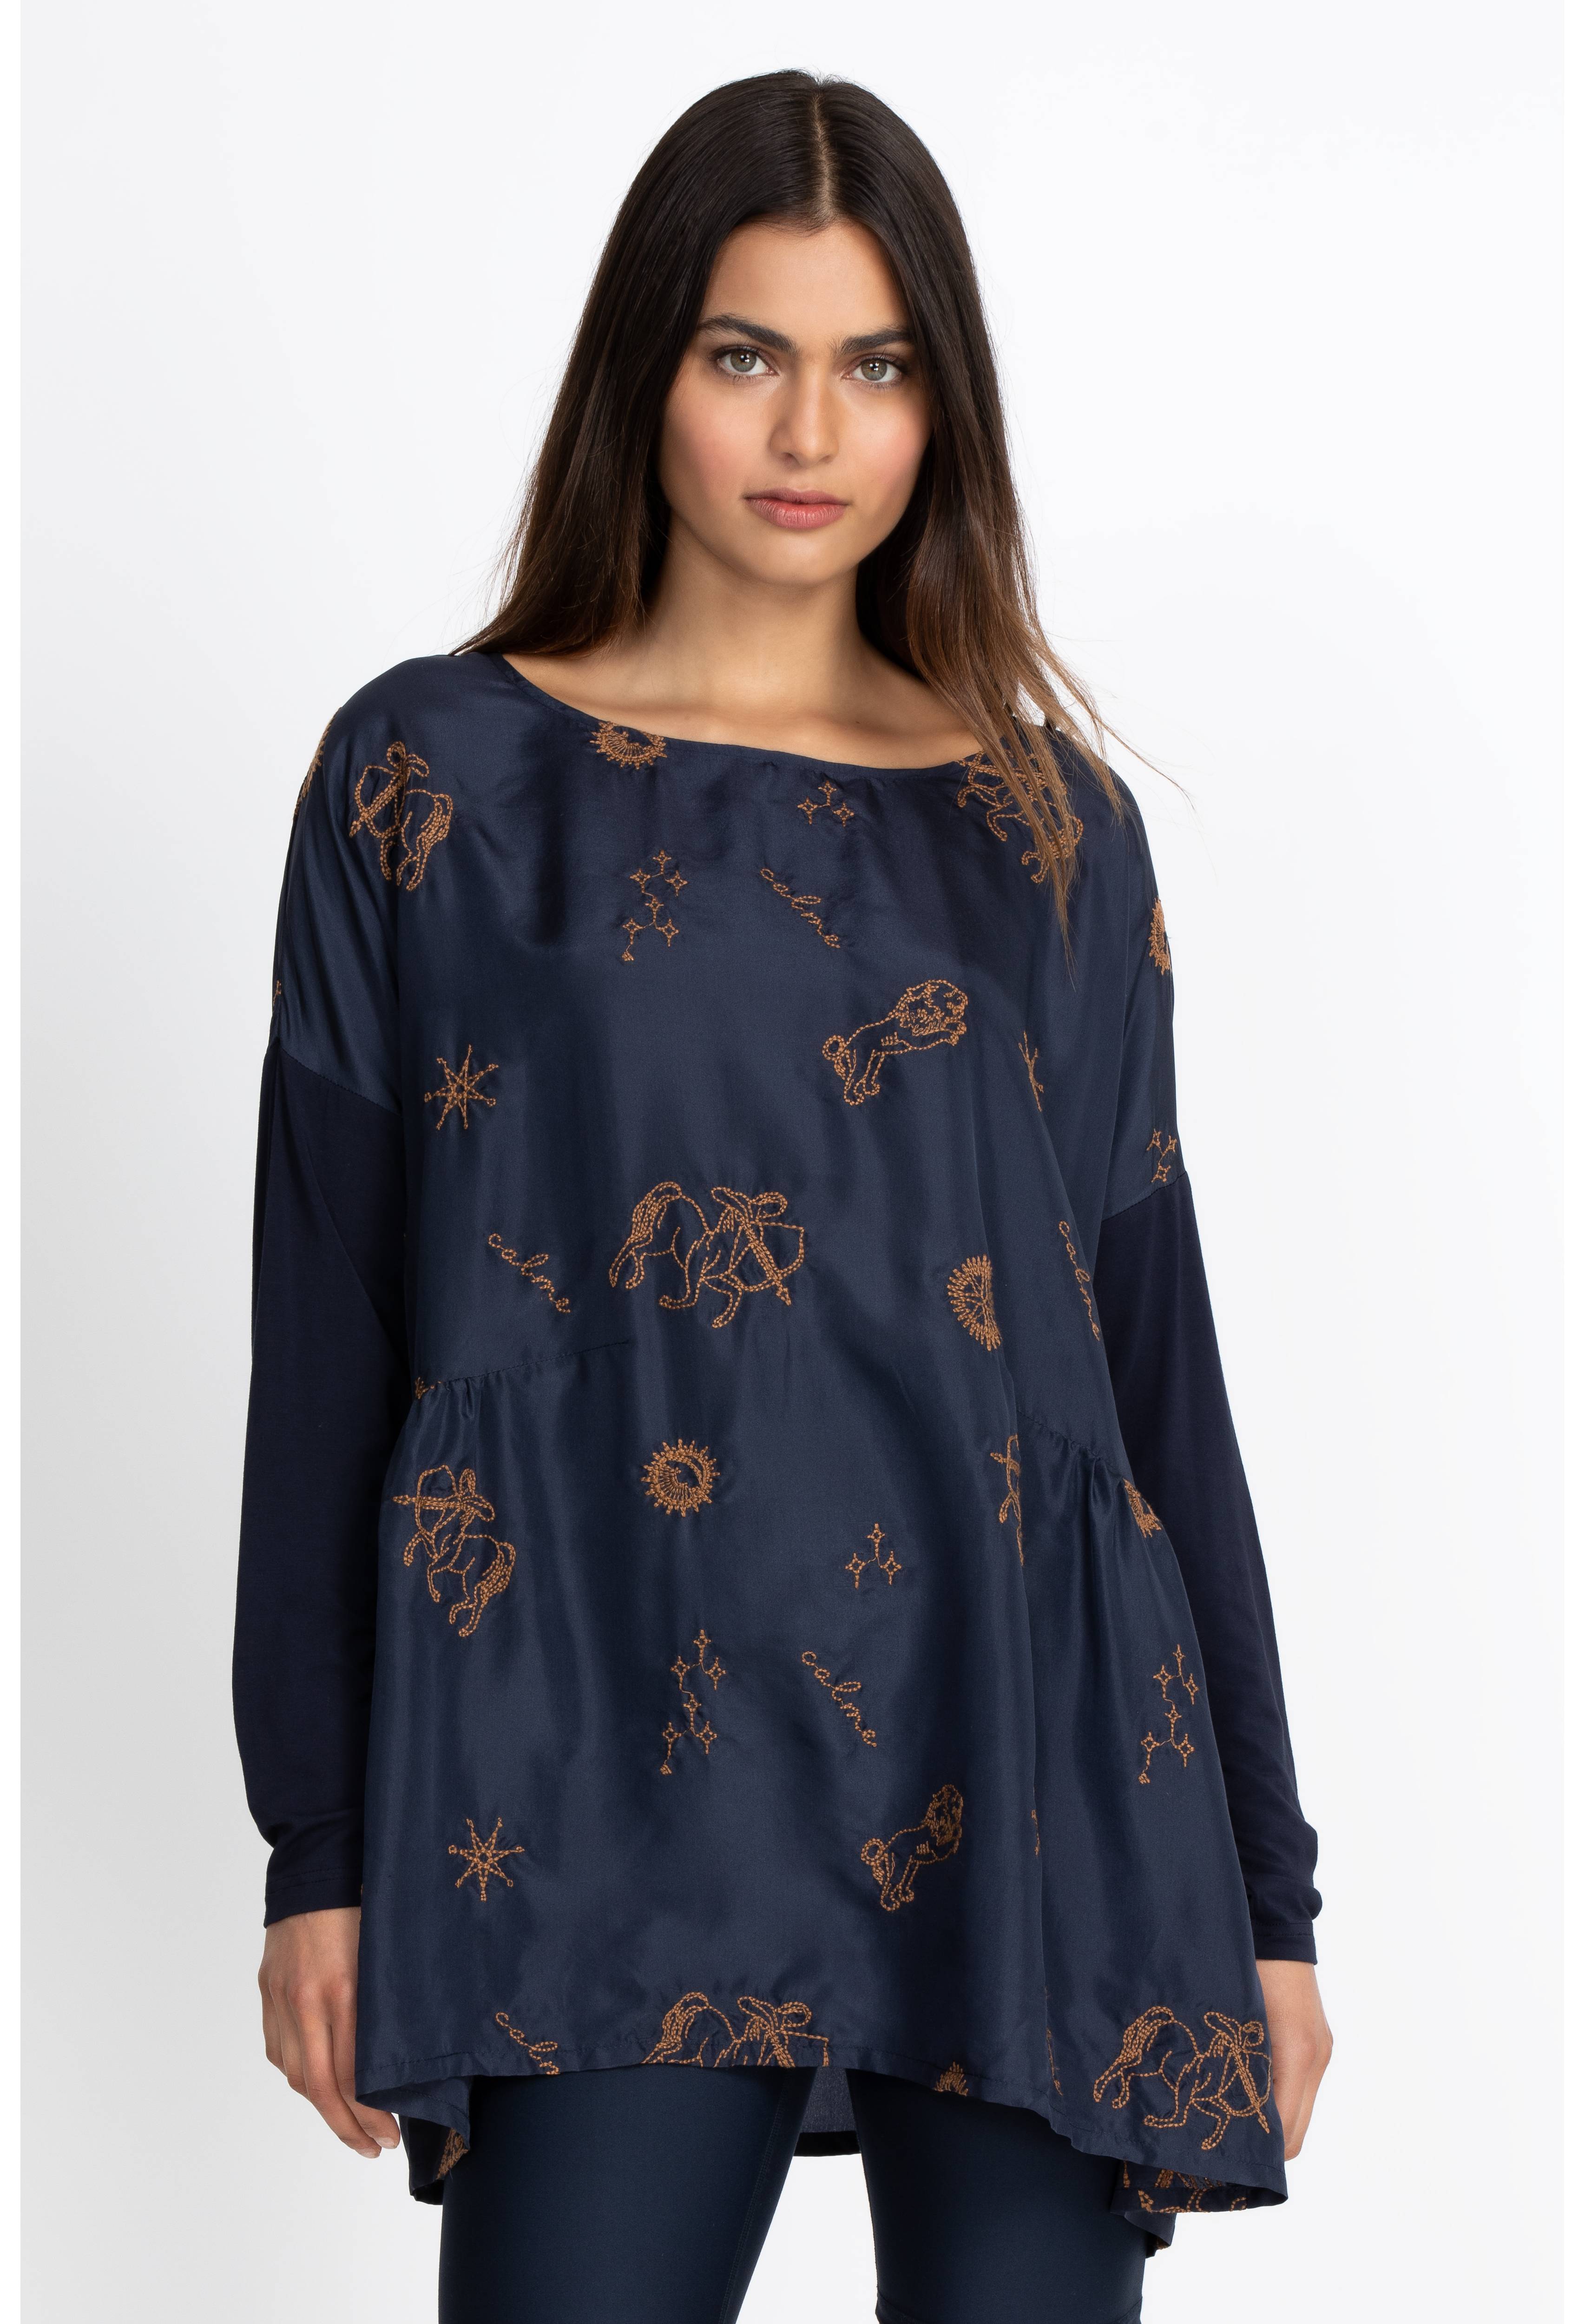 Astrology Embroidered Blouse, , large image number 1